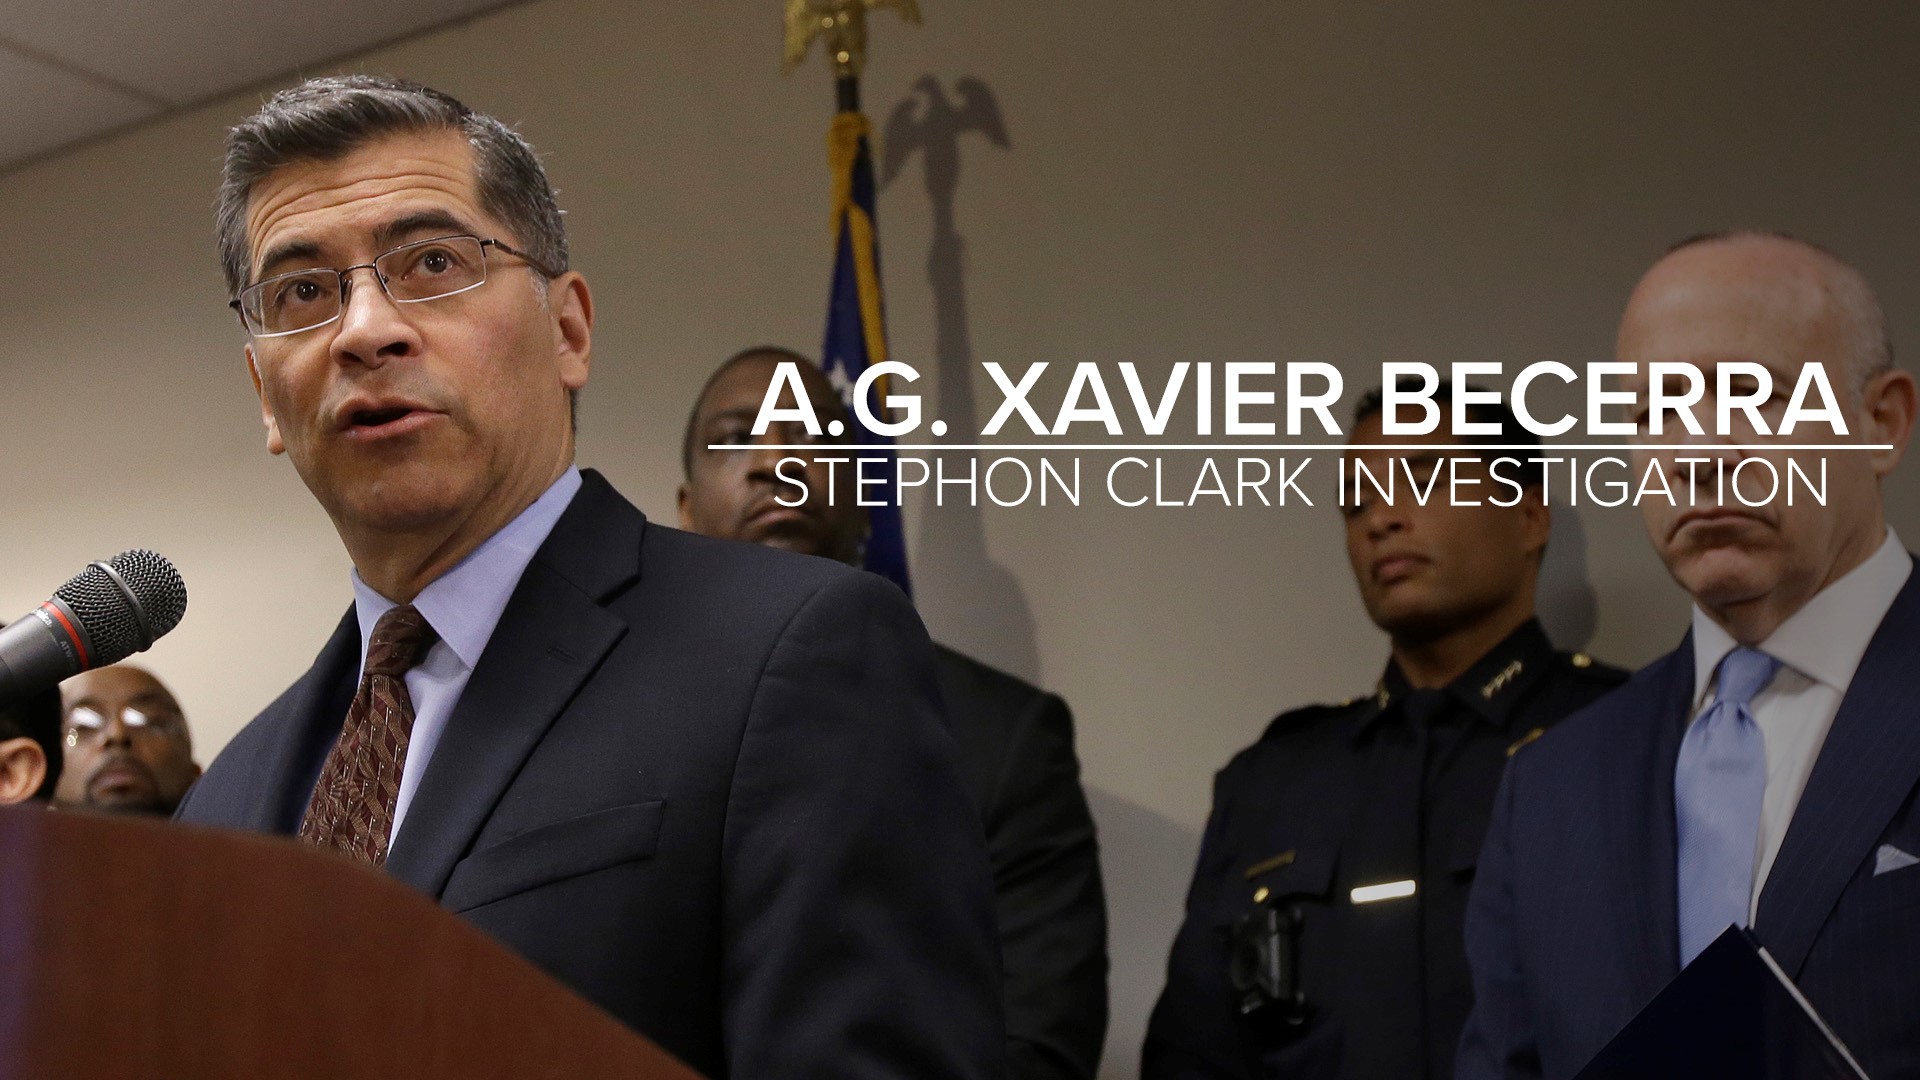 California Attorney General Xavier Becerra announced his office will not file any criminal charges against the officers who shot and killed Stephon Clark last March in Sacramento. The decision follows an independent investigation into Clark's death and another decision from Sacramento District Attorney Anne Marie Schubert to not file criminal charges. The lack of charges has led to protests and arrests in Sacramento.